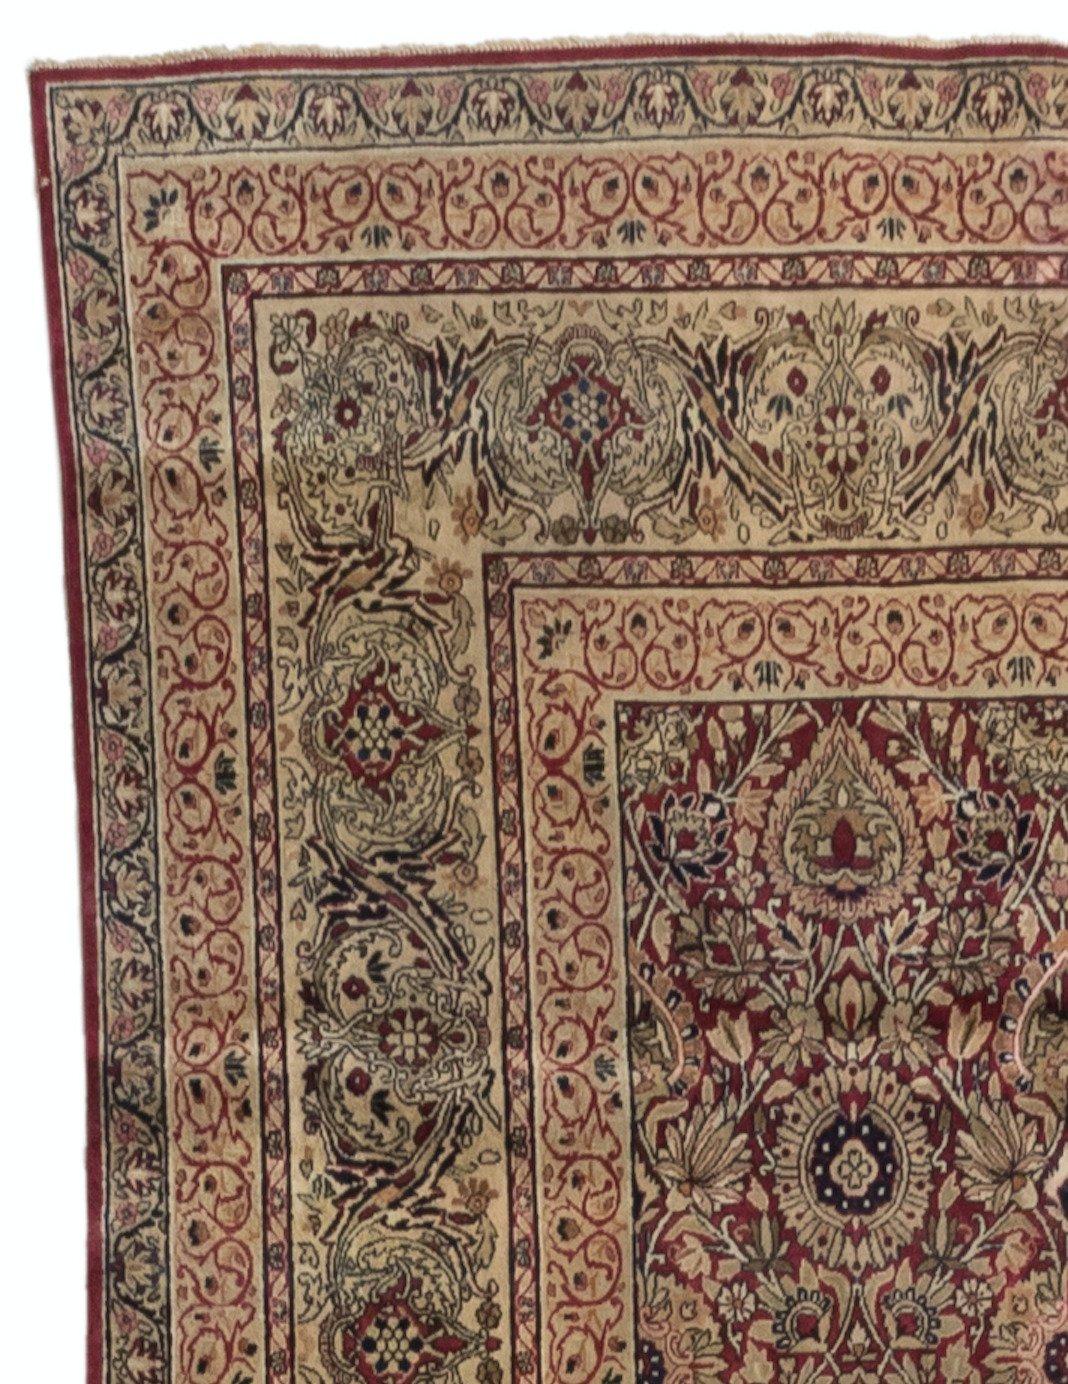 Hand-Knotted Antique Persian Floral Lavar Rug, circa 1880s-1900s For Sale